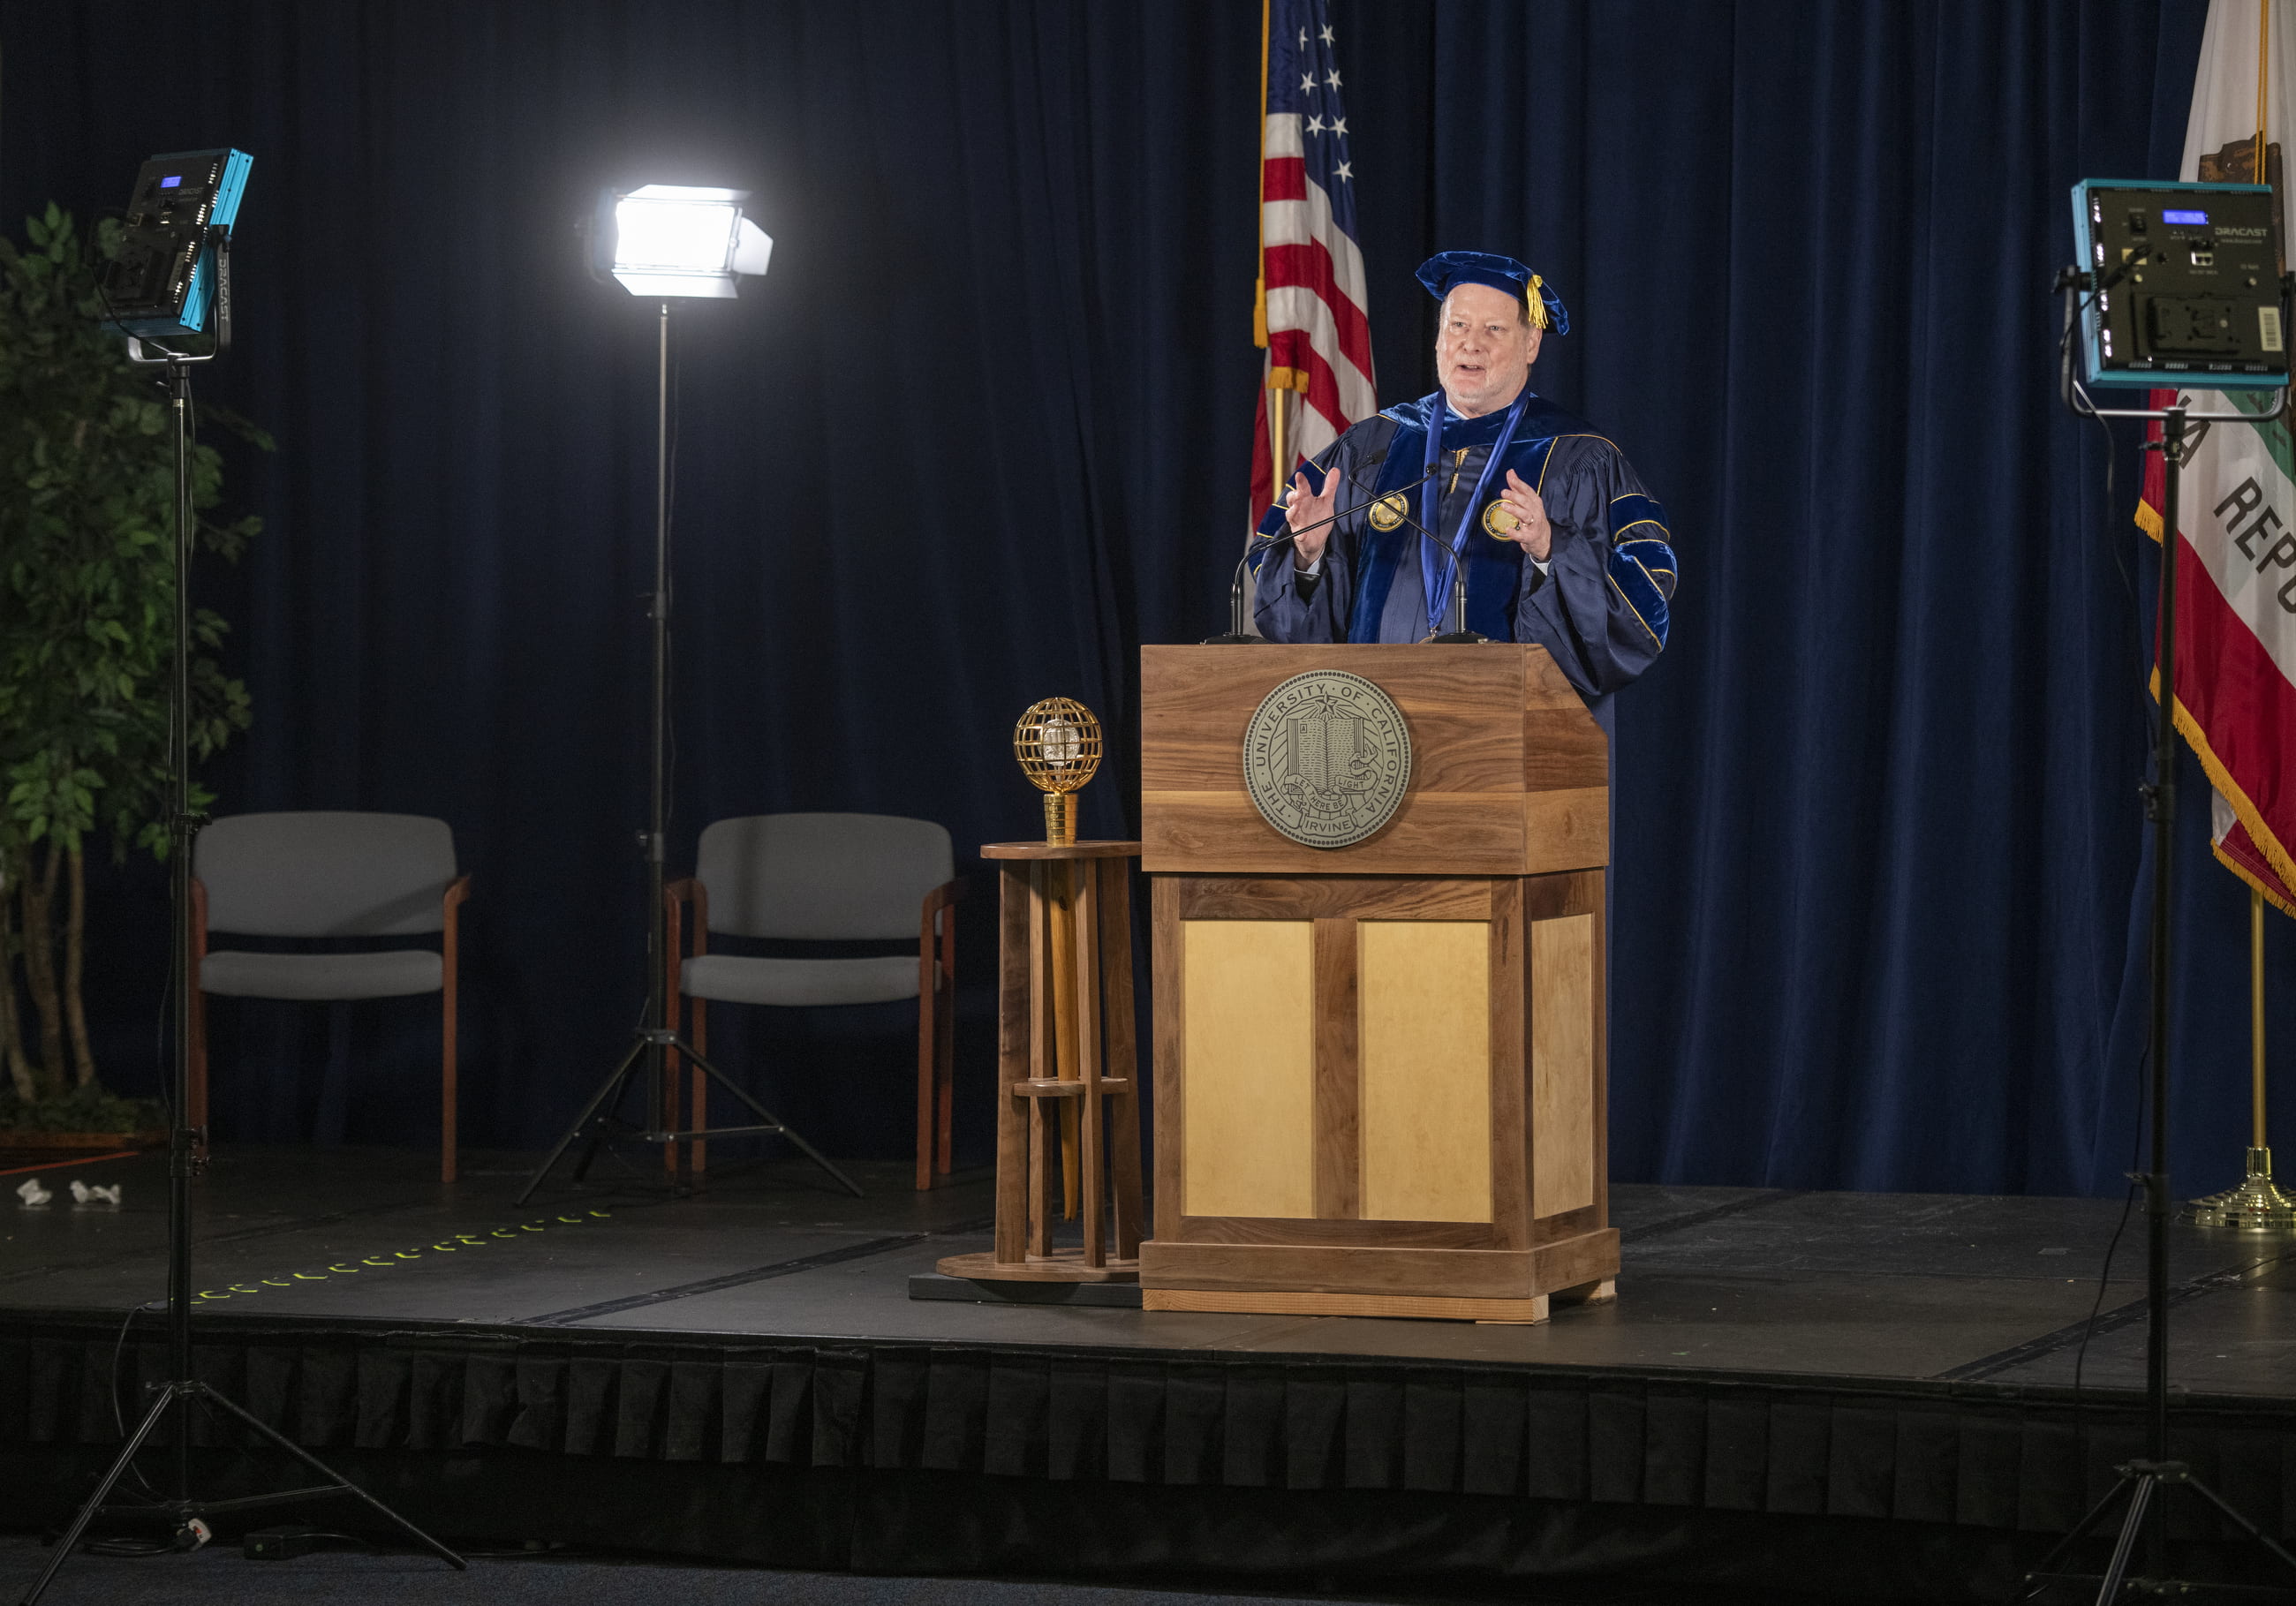 Chancellor Howard Gillman tapes commencement addresses in the Koll room in UCI's Bren Events Center